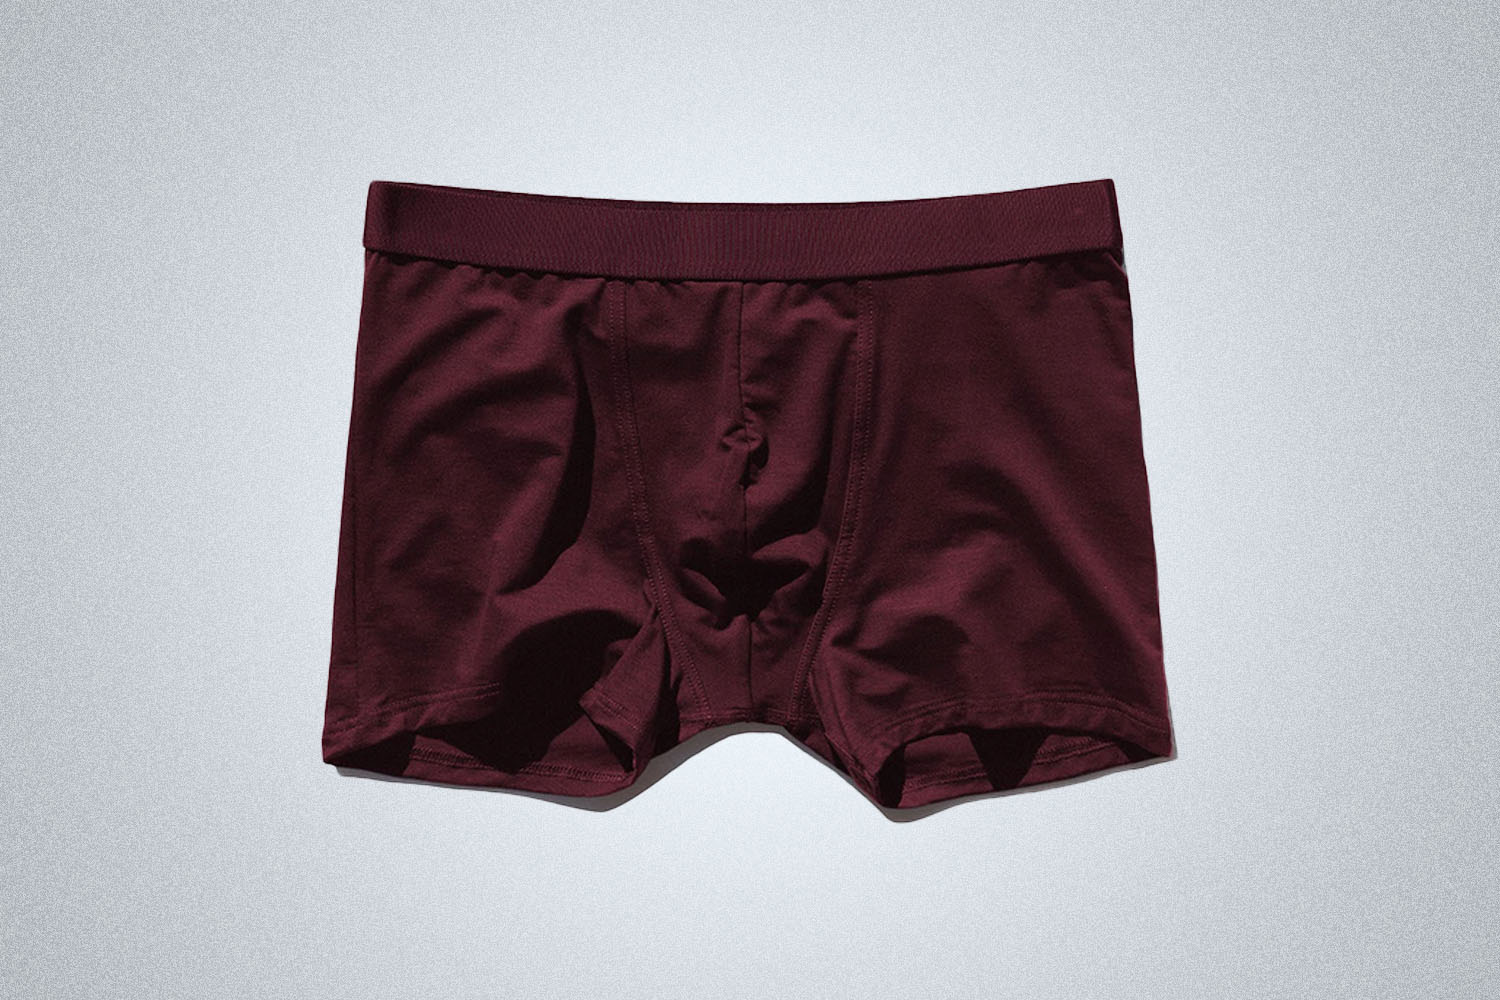 a pair of red boxers on a grey background